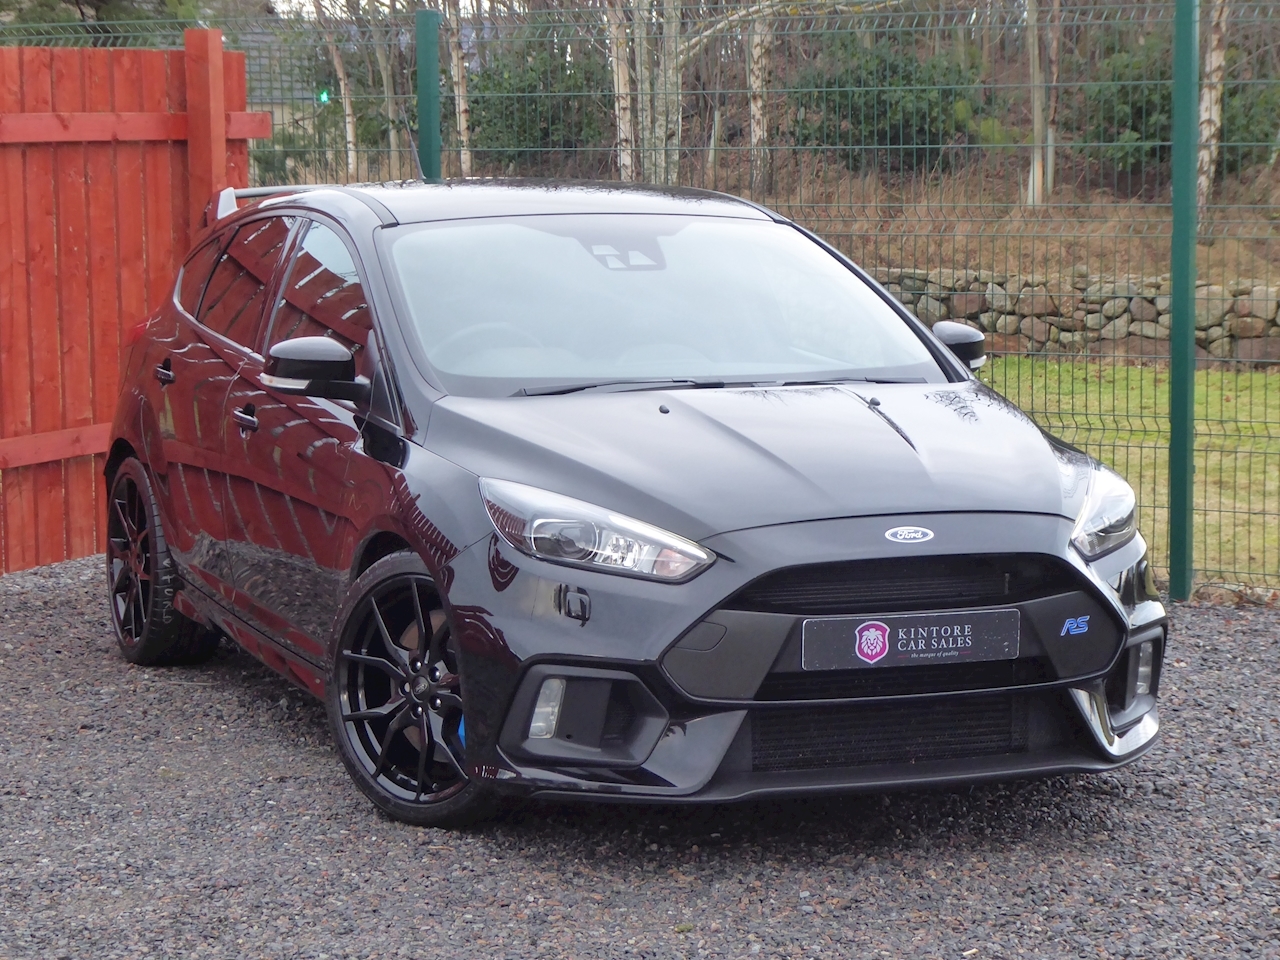 Used 2016 Ford Focus Rs Hatchback 2.3 Manual Petrol For Sale Kintore